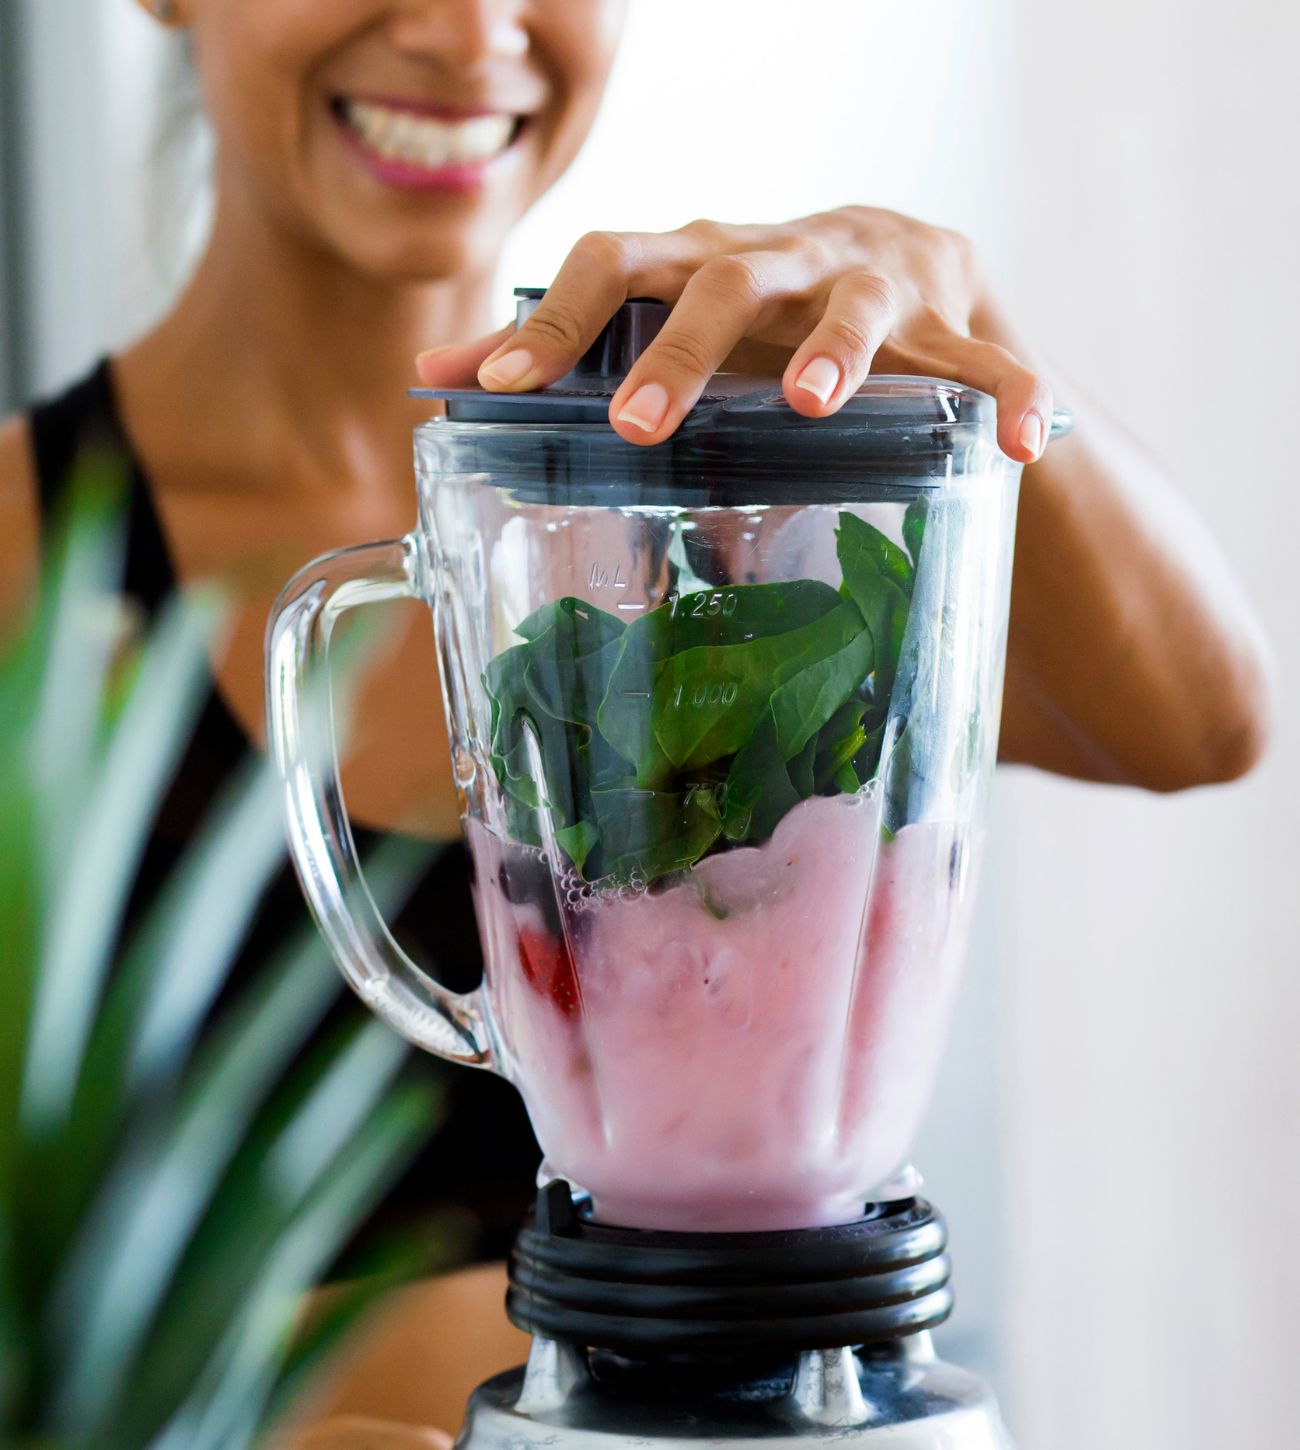 Photo of woman blending together a berry and fresh spinach smoothie.